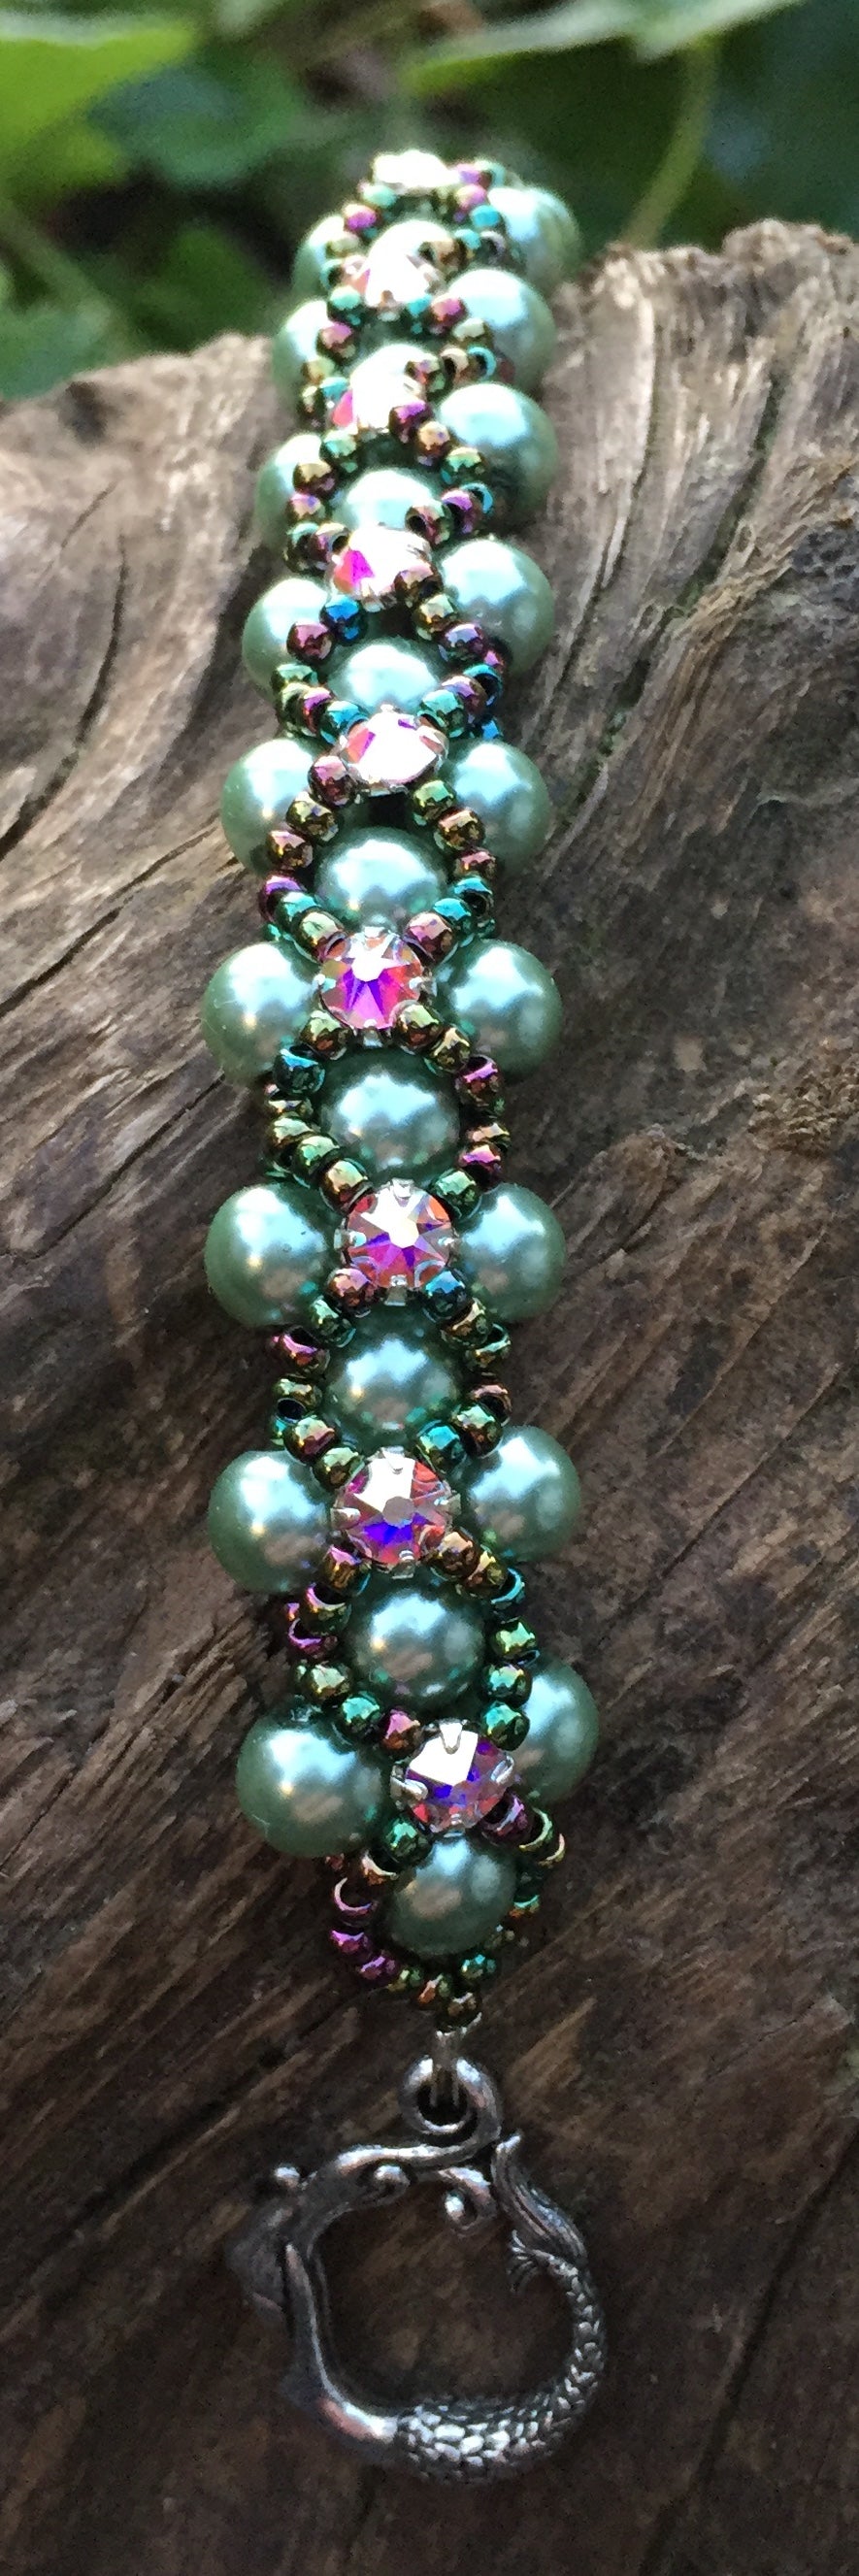 This Sage colored pearl bracelet is entwined with Metallic Iris Seed beads and Swarovski Crystal Montees and measures 7 1/2